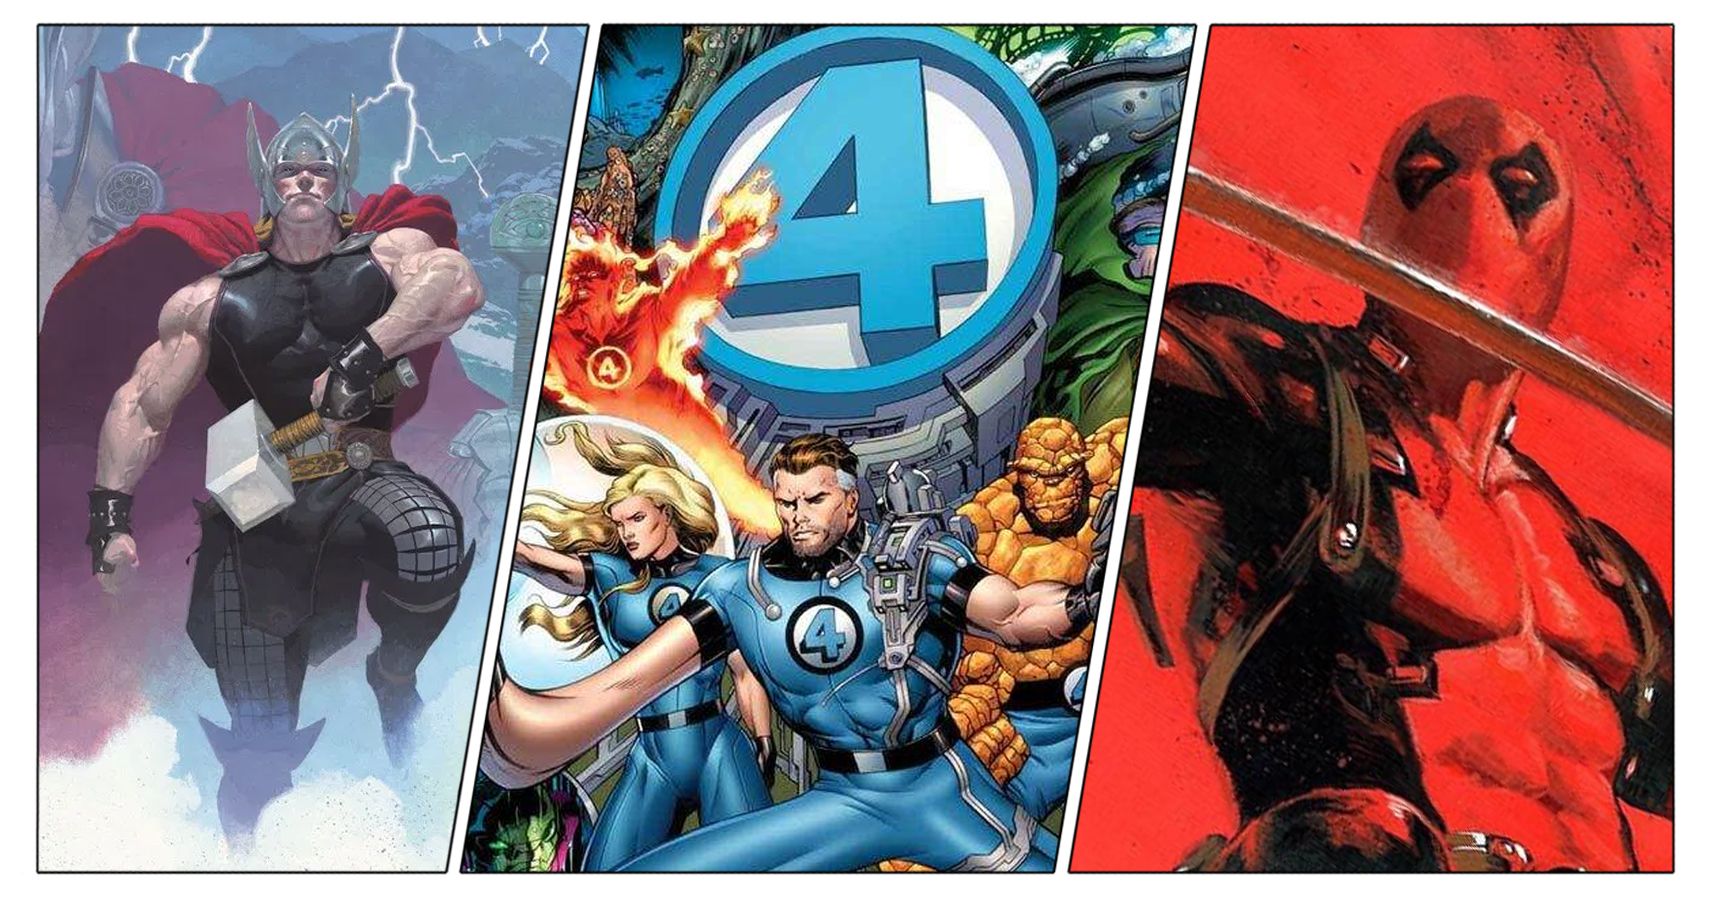 10 Marvel Animated Series We're Dying To See